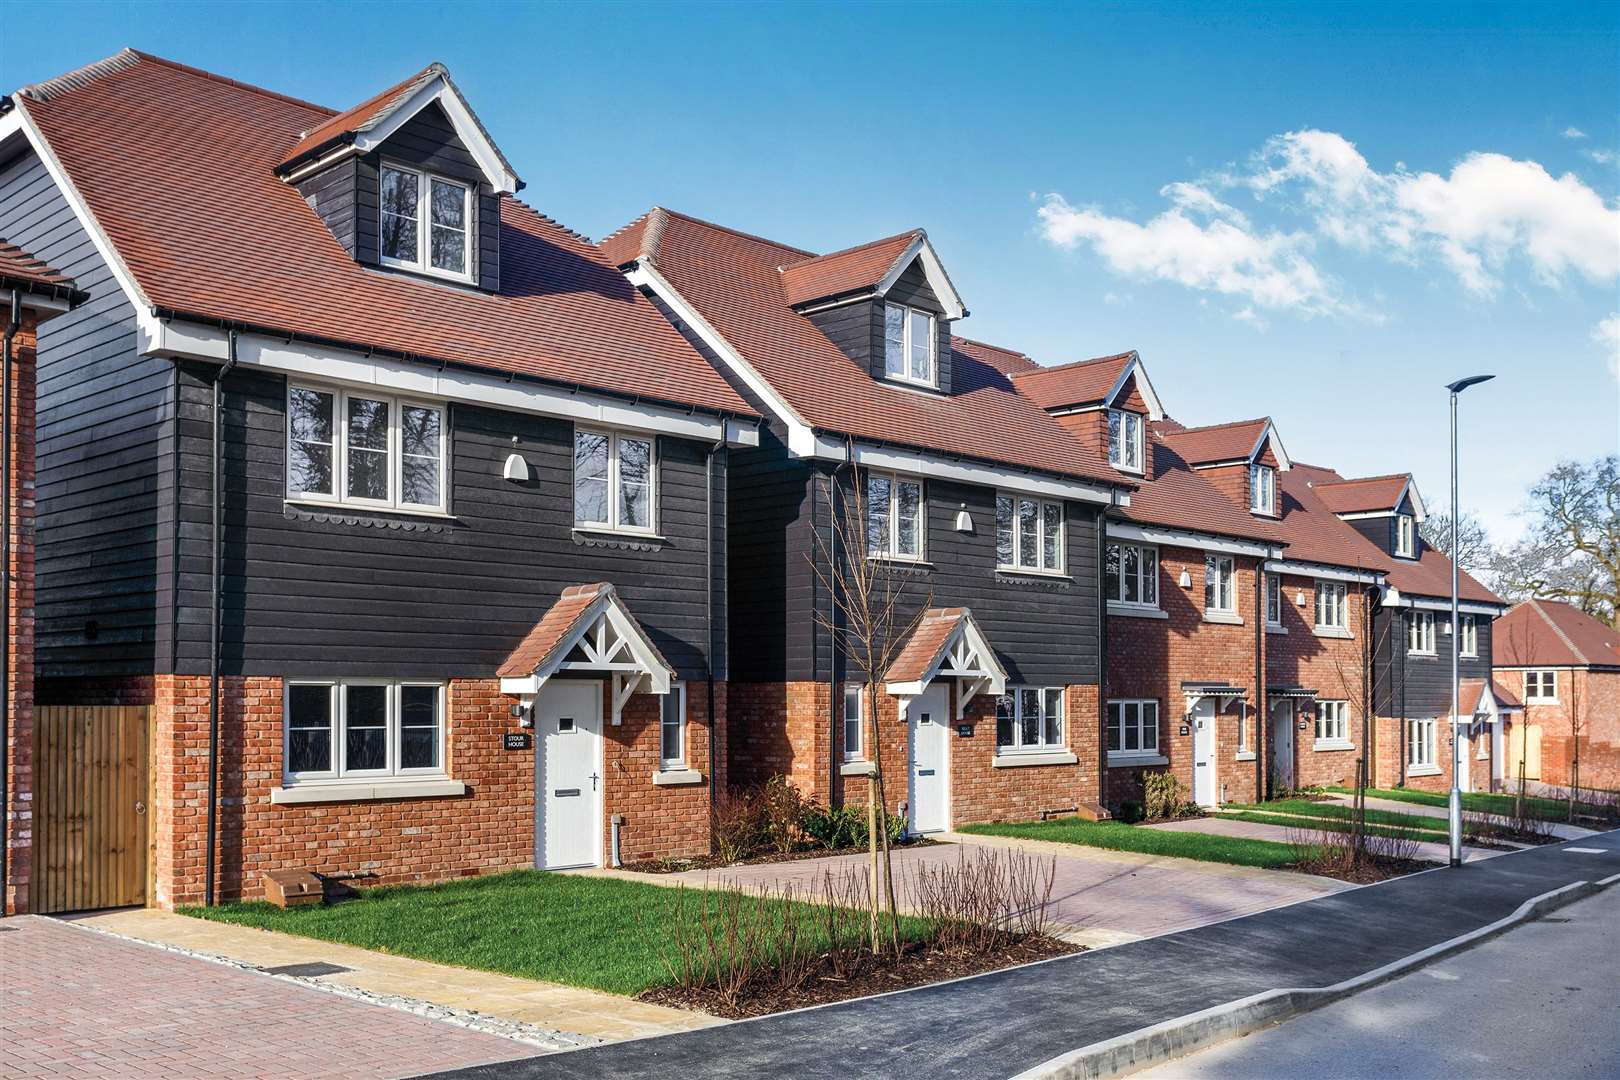 A Chartway Group development at Millside in East Malling